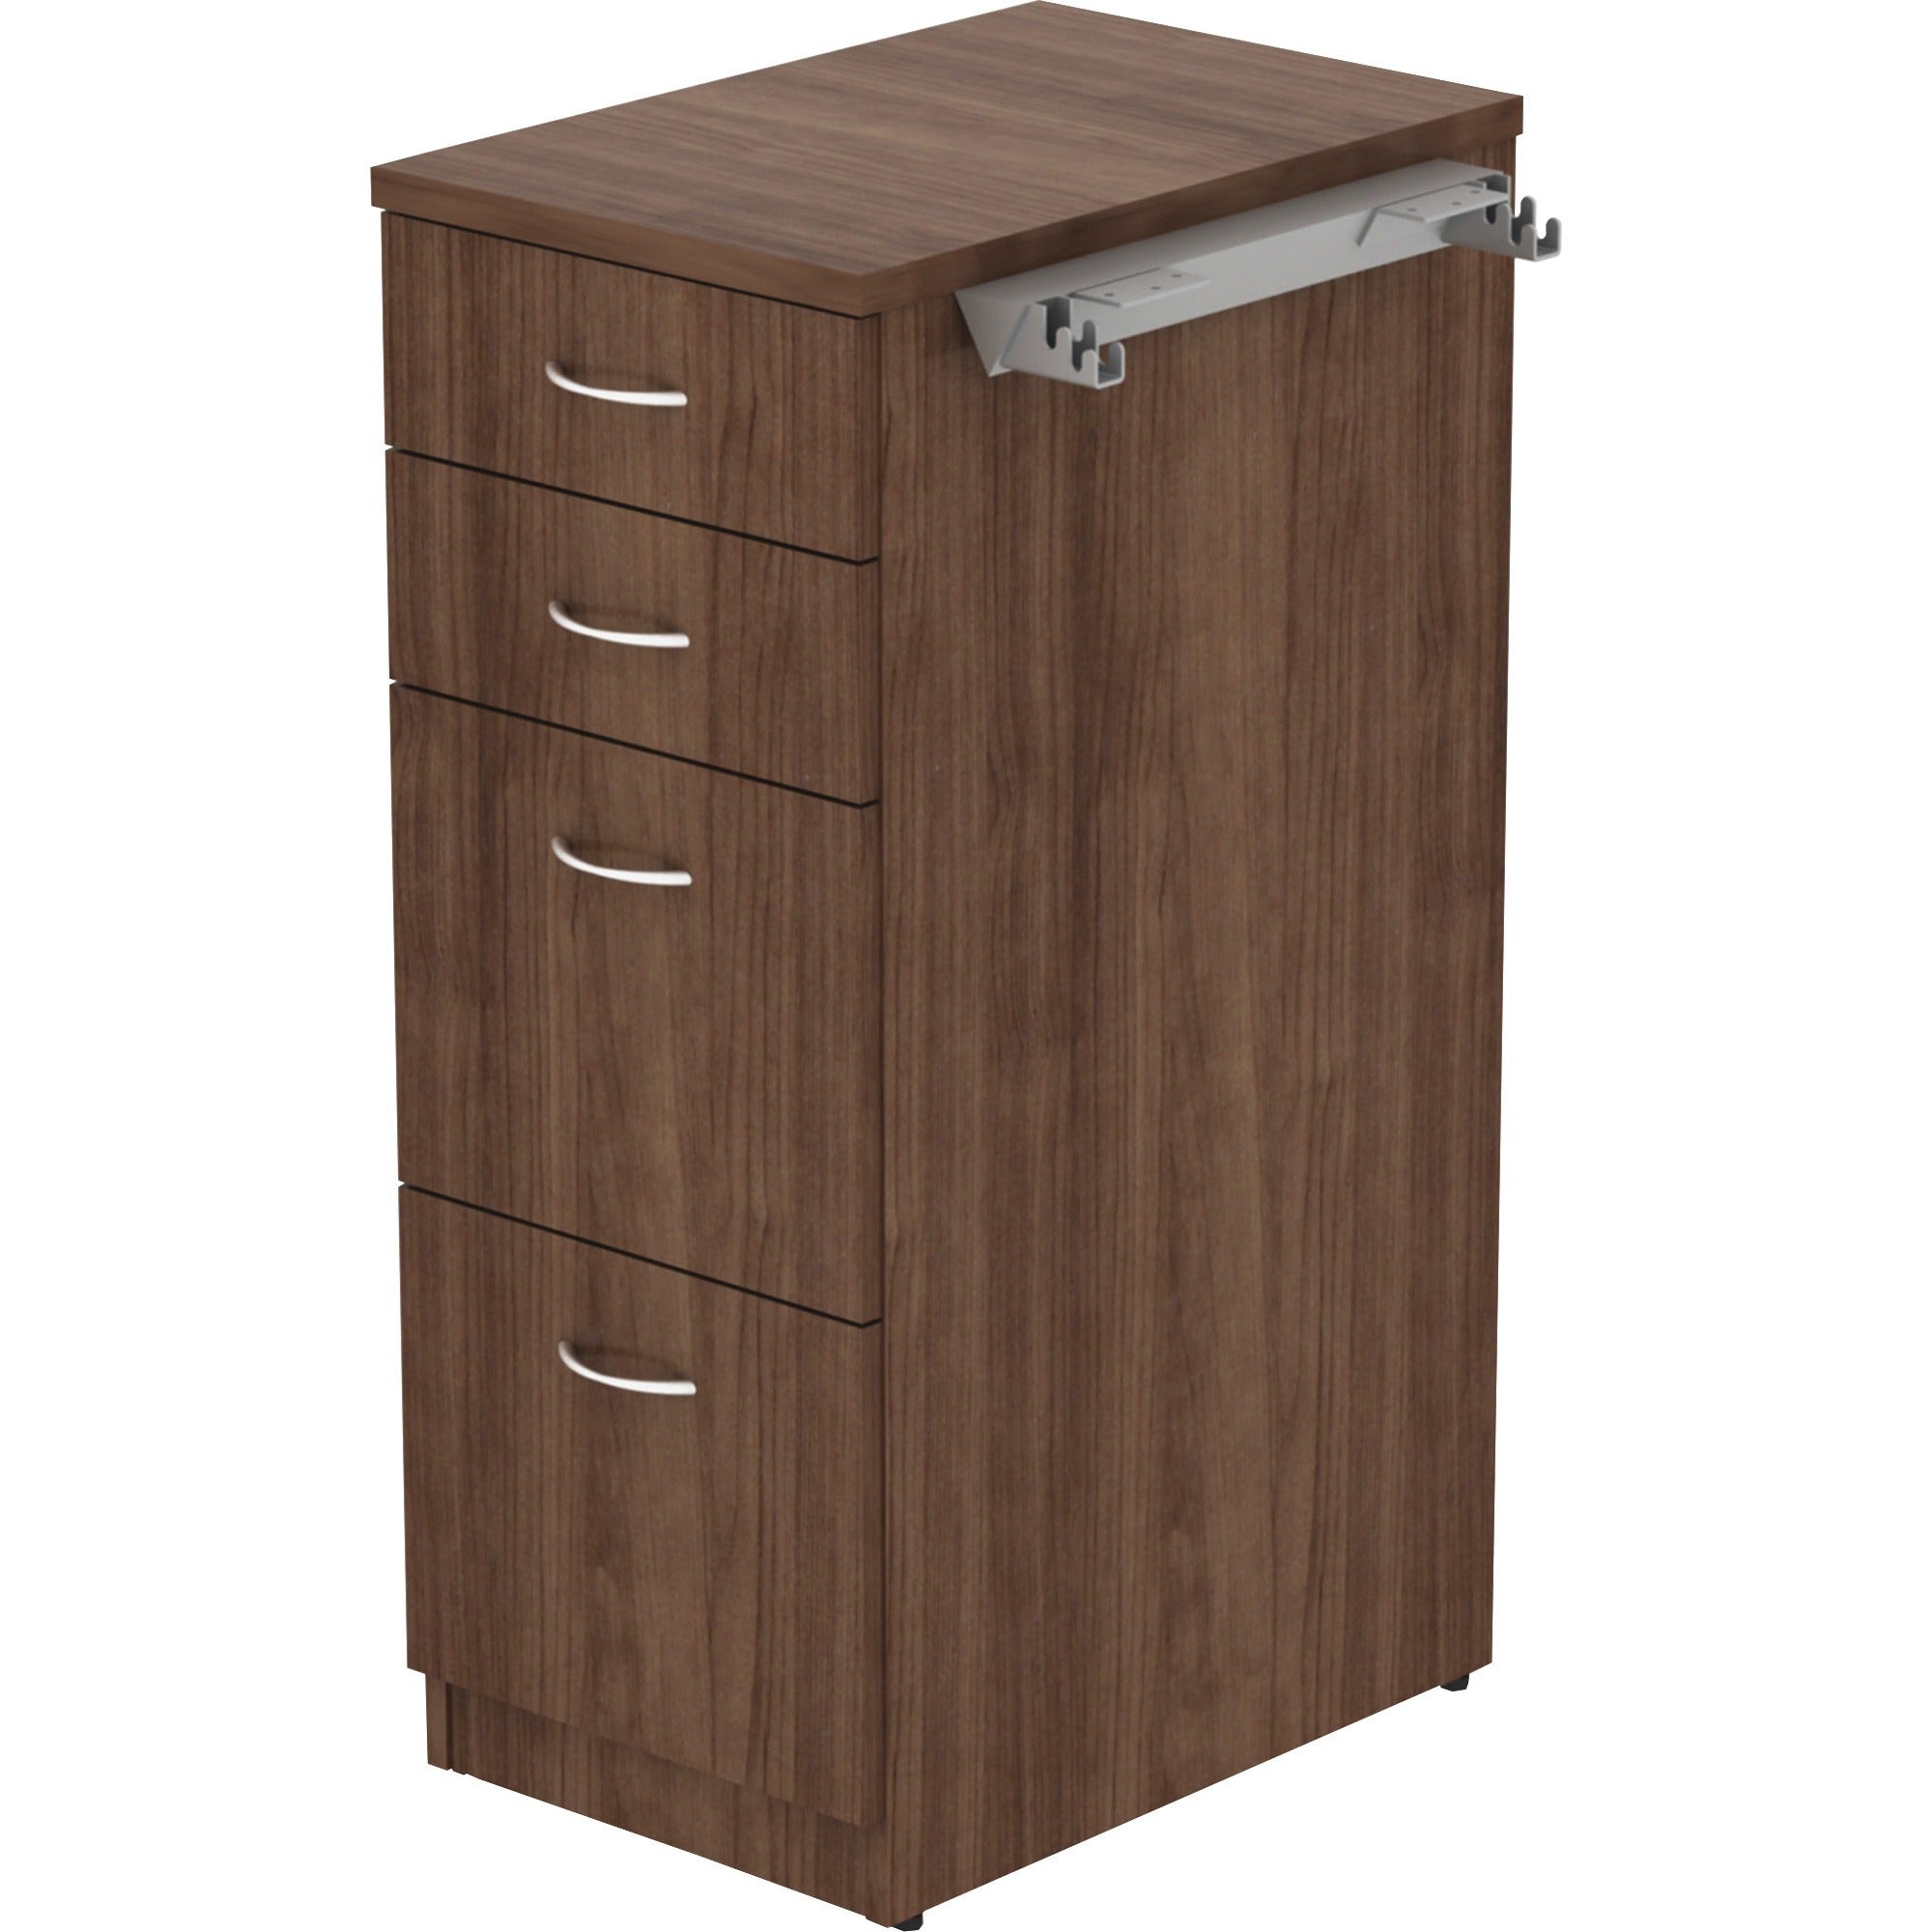 lorell-relevance-series-4-drawer-file-cabinet-155-x-236404-4-x-file-box-drawers-material-laminate-finish-walnut_llr16236 - 2